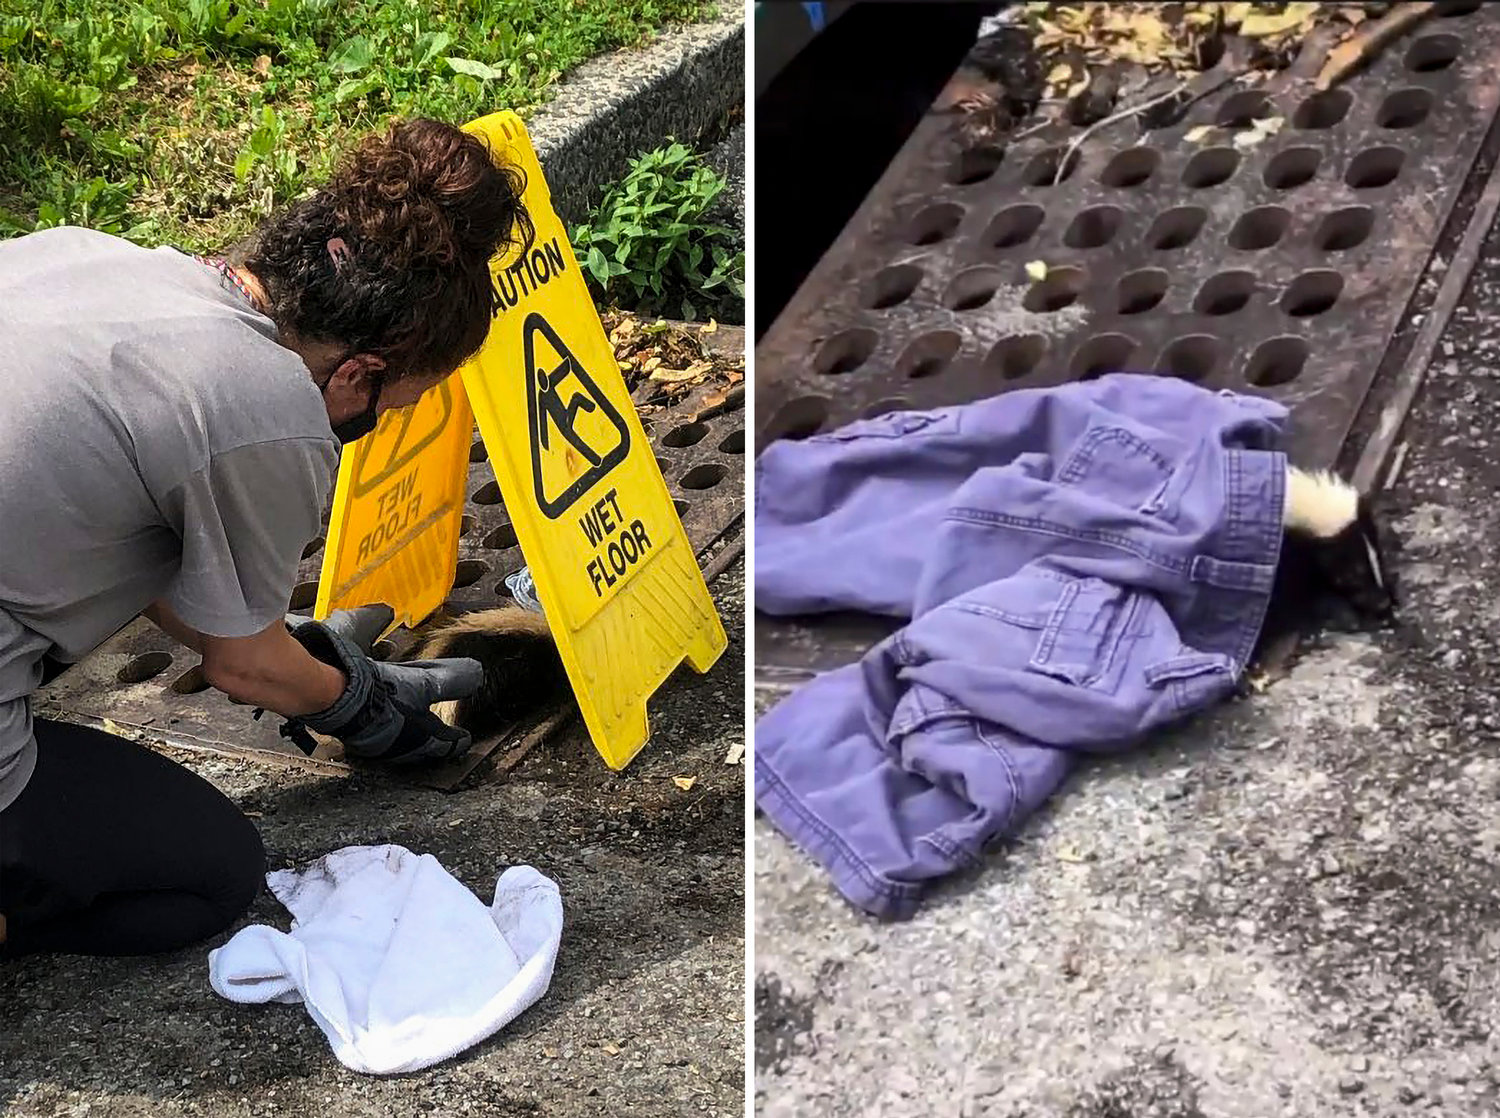 Sandy Sierra brought a caution sign to warn others to steer clear as she and other North Riverdale neighbors helped rescue a baby skunk from where he was trapped inside a sewer grate on Arlington Avenue. They used clothing to cover the skunk, keeping him warm.